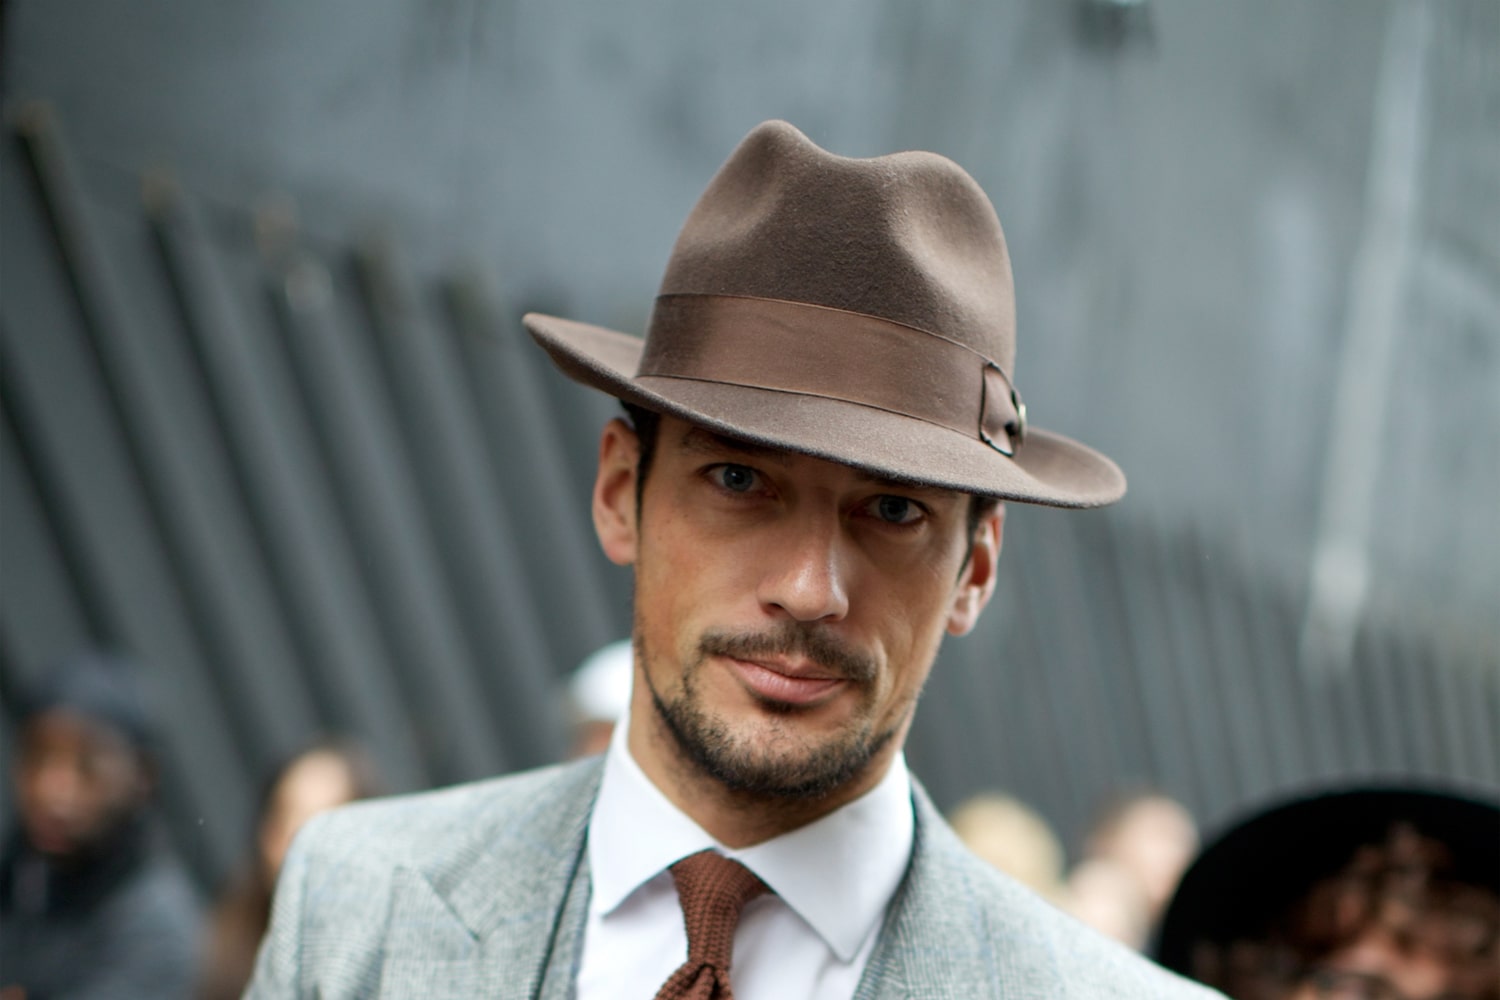 Try New and Unique Taste of Men’s Hat with Wide Brim Fedora Hats